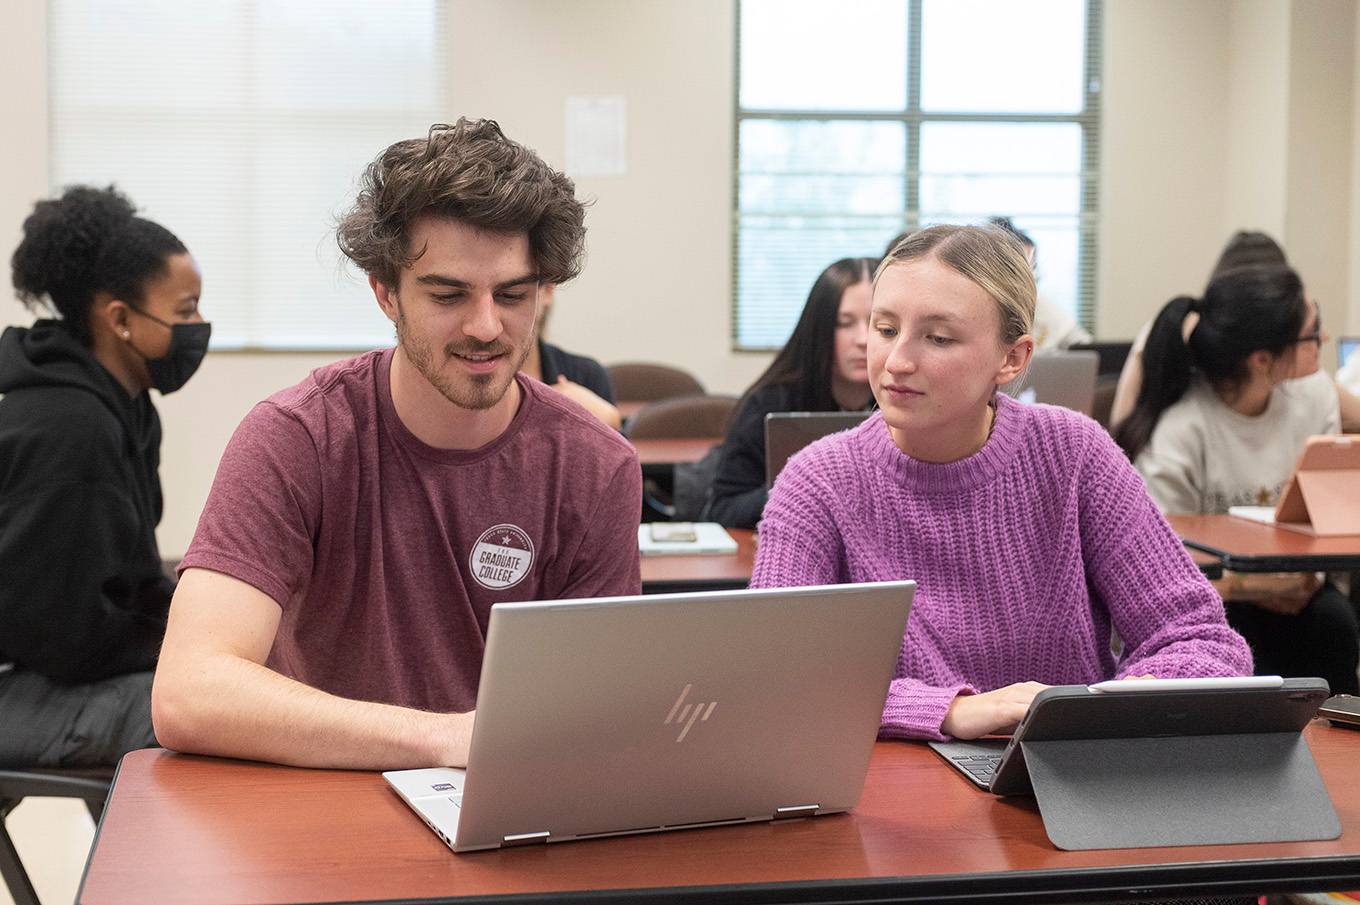 man and woman looking at computer in classroom